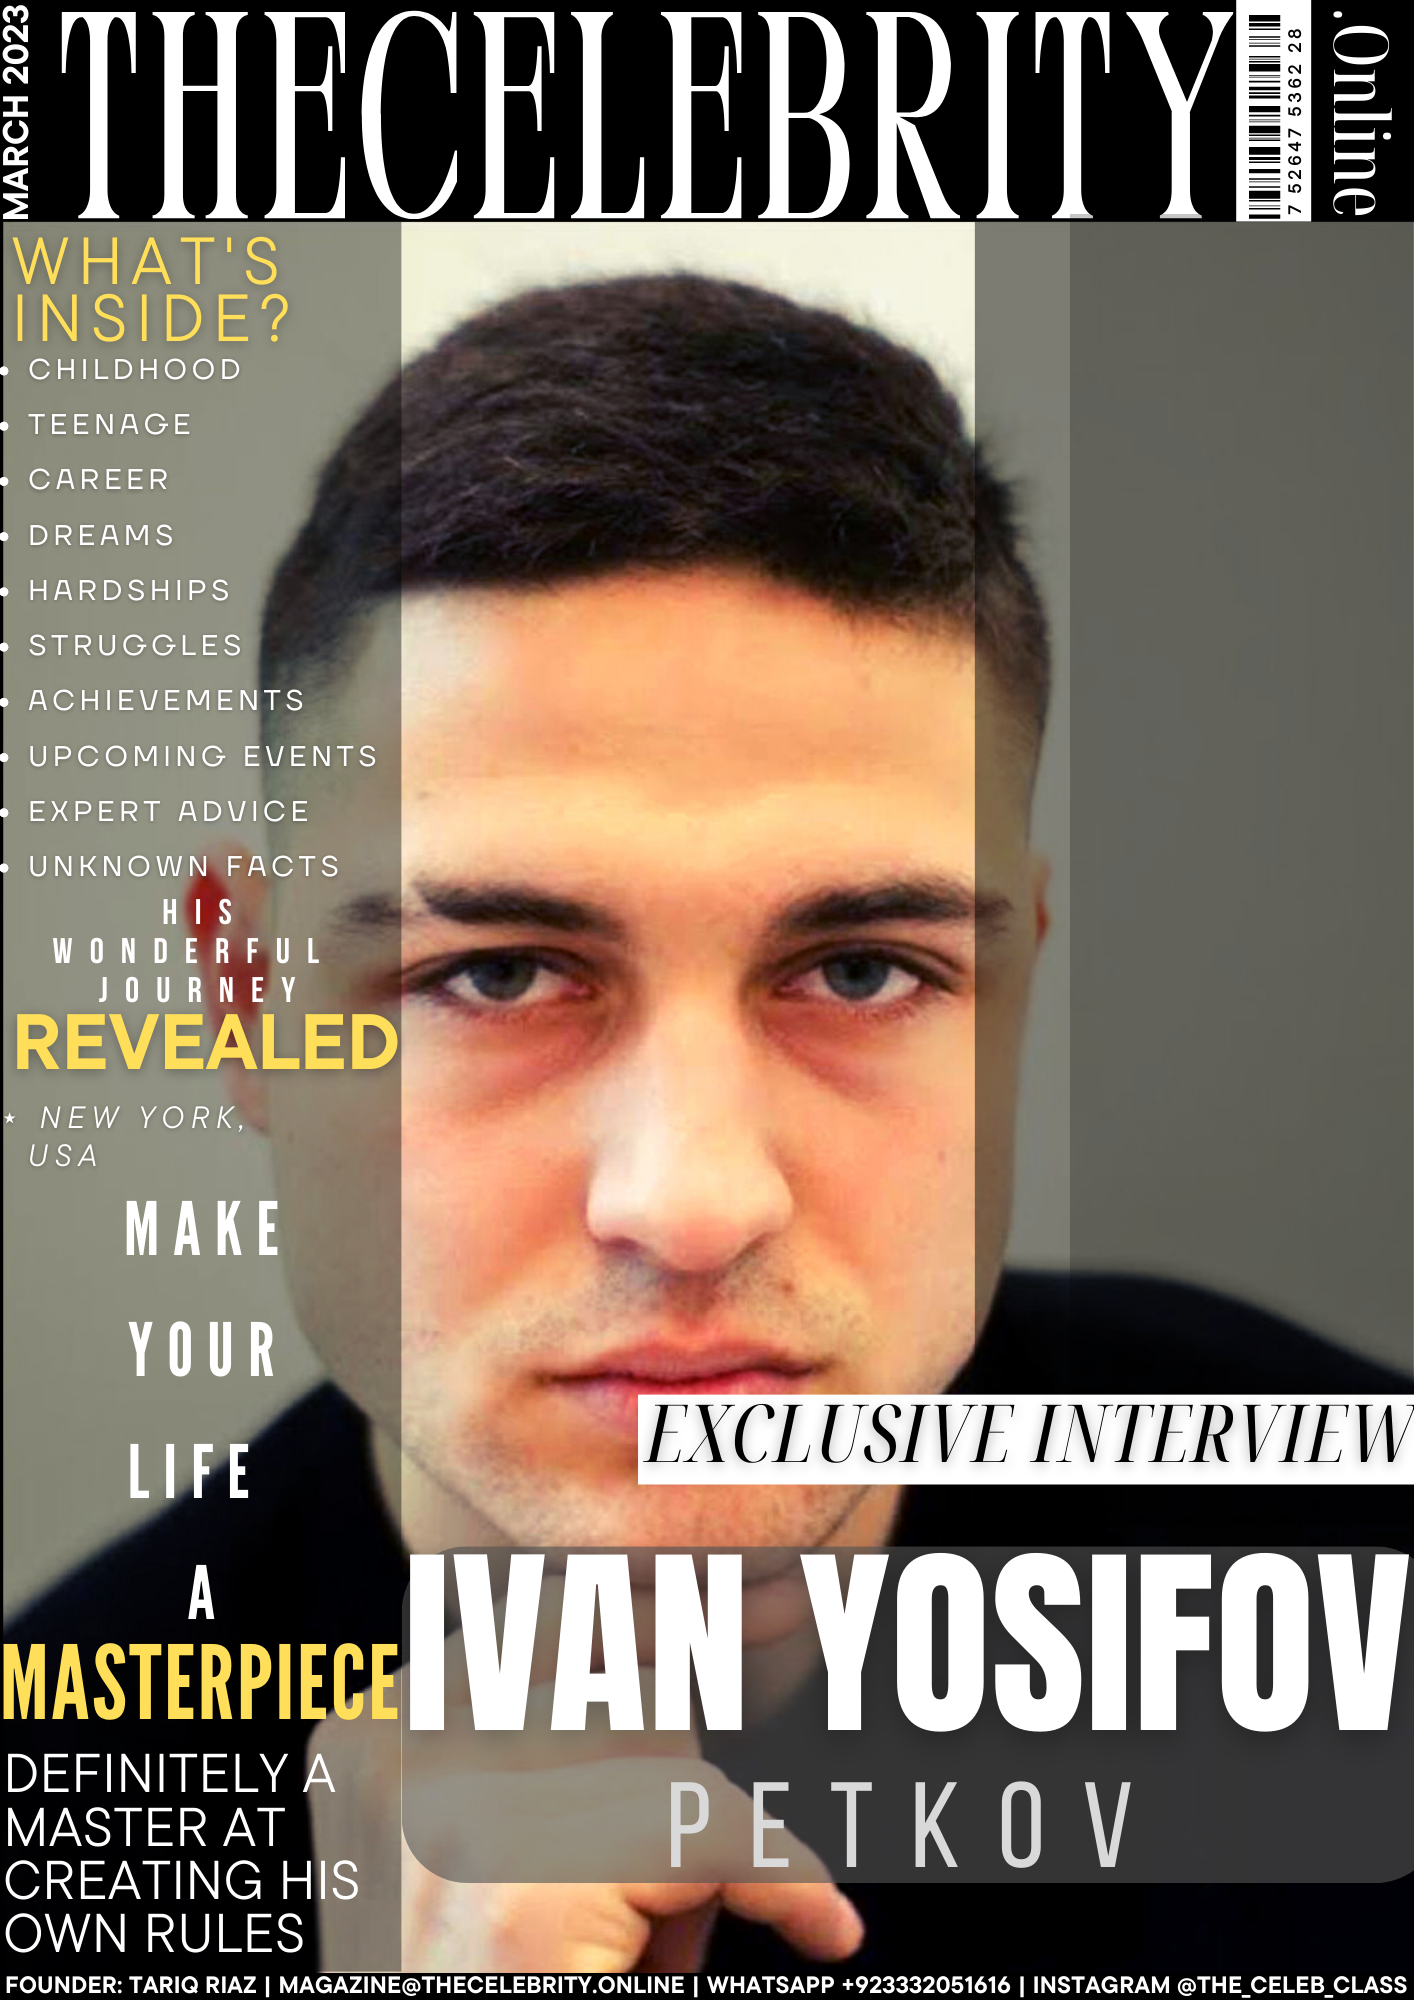 Ivan Yosifov Petkov Exclusive Interview – ‘Time Is Way More Valuable Than Money’